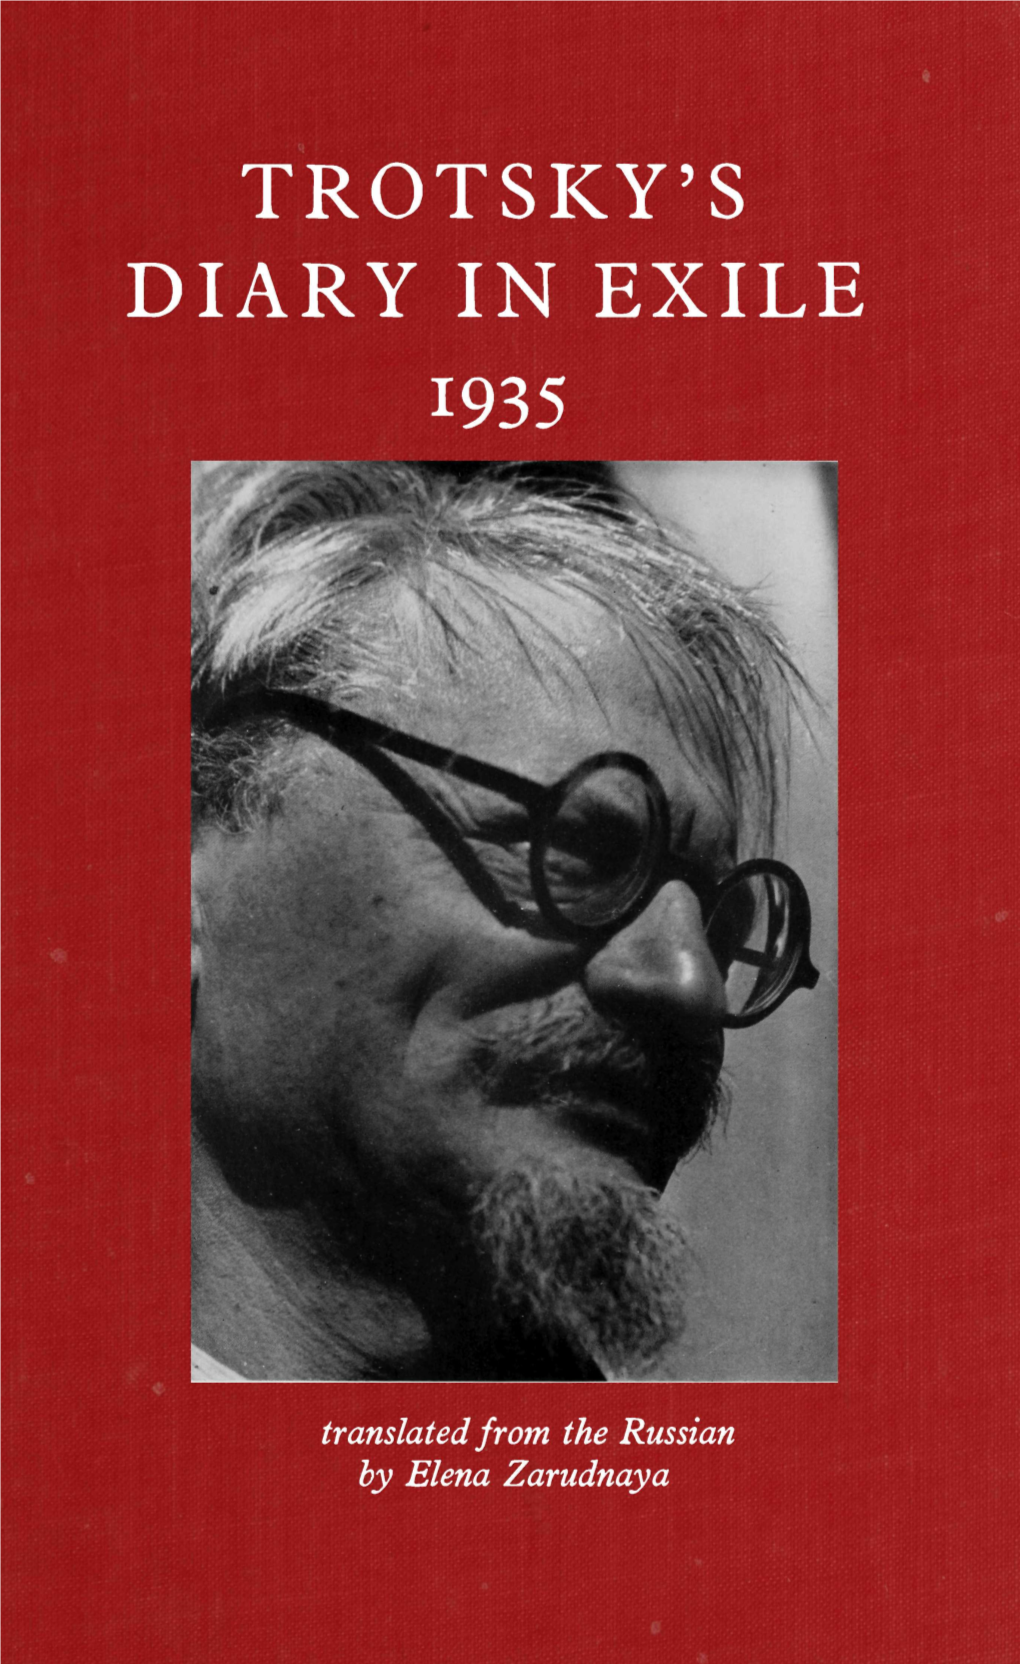 Trotsky's Diary in Exile